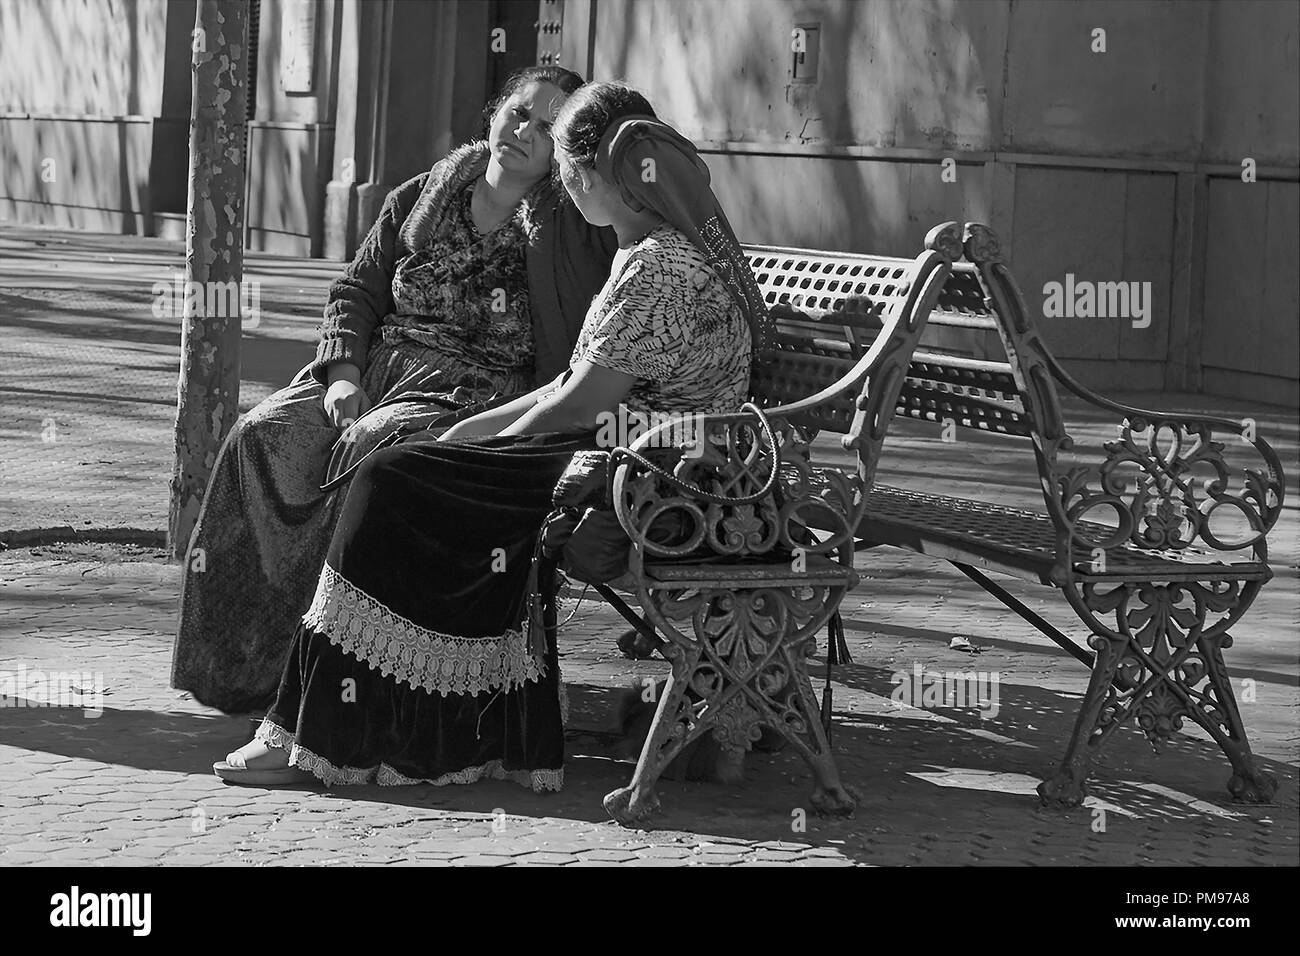 Women chat on a bench in Calle San Pablo, Sevilla, Andalusia, Spain: black and white version Stock Photo